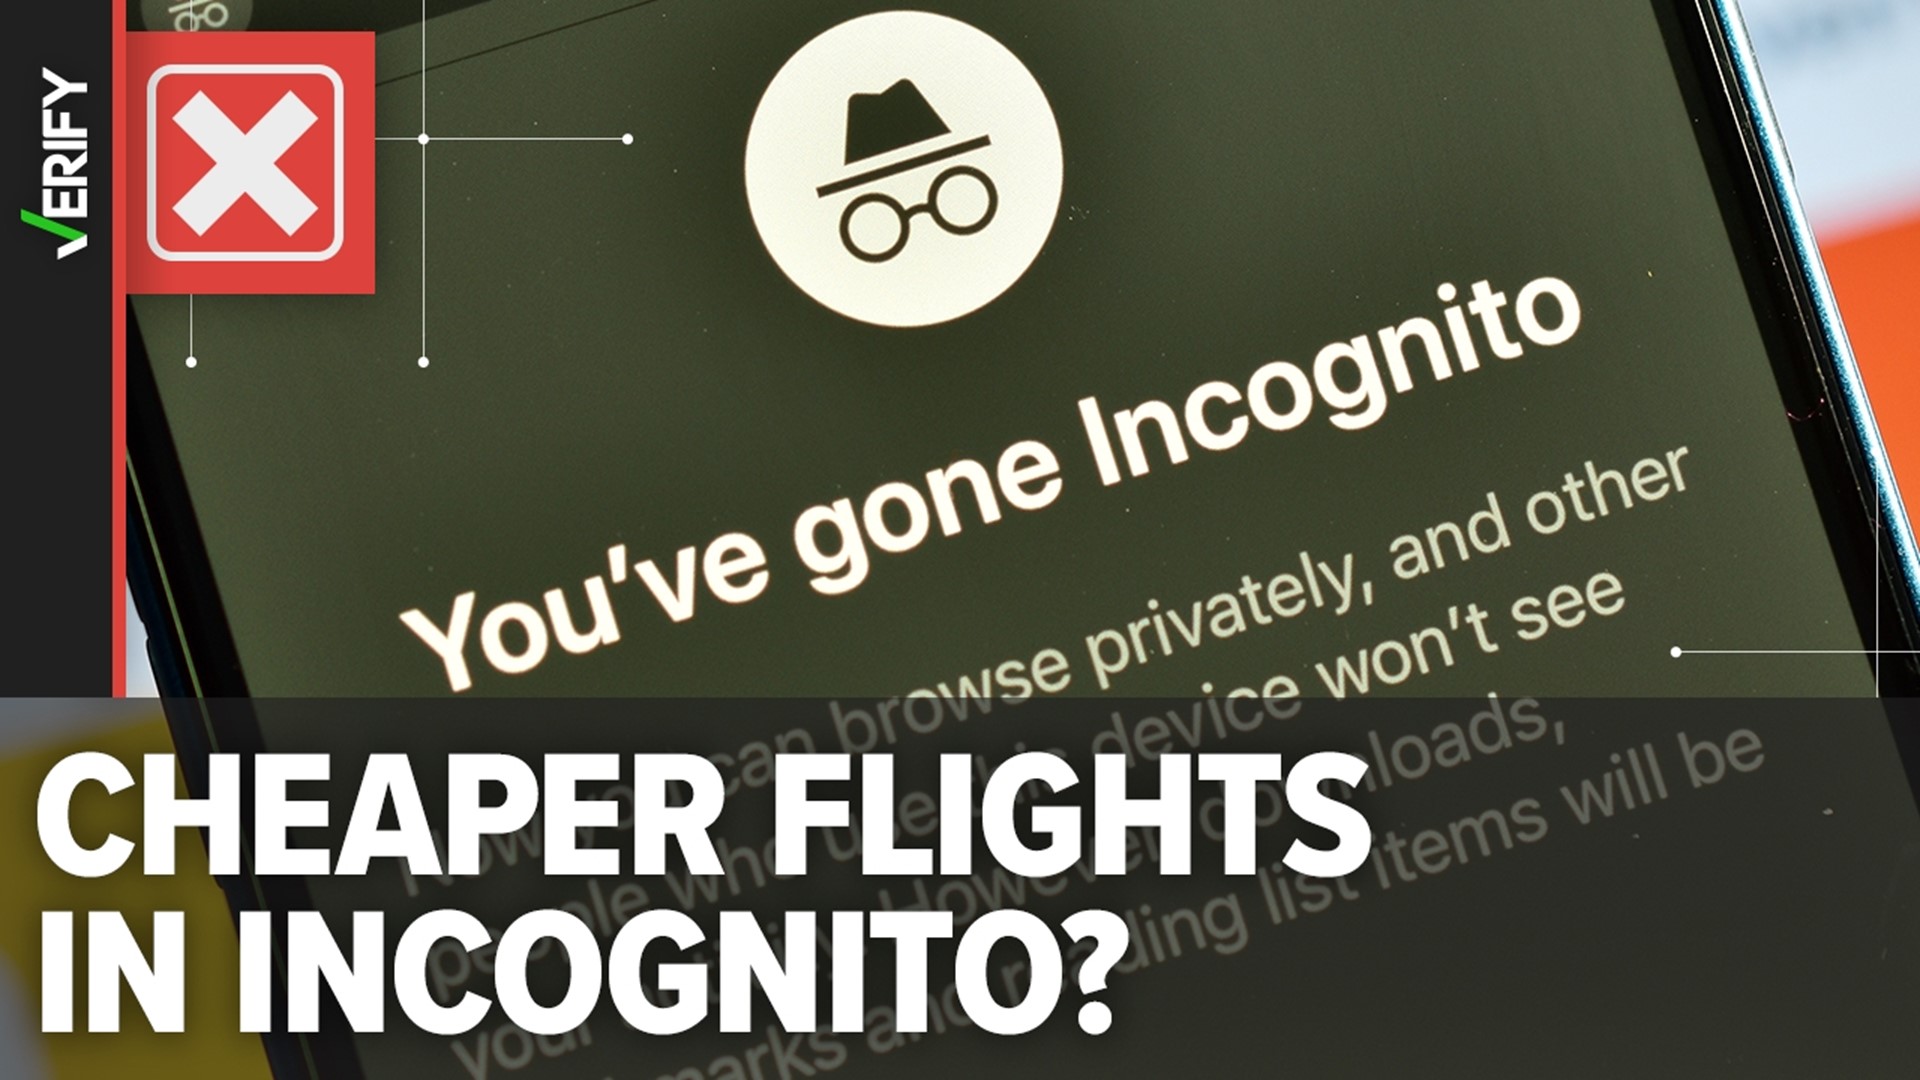 It’s a myth that searching for flights in incognito mode will make them cheaper. Clearing cookies in your browser also will not help you save money on airfare.